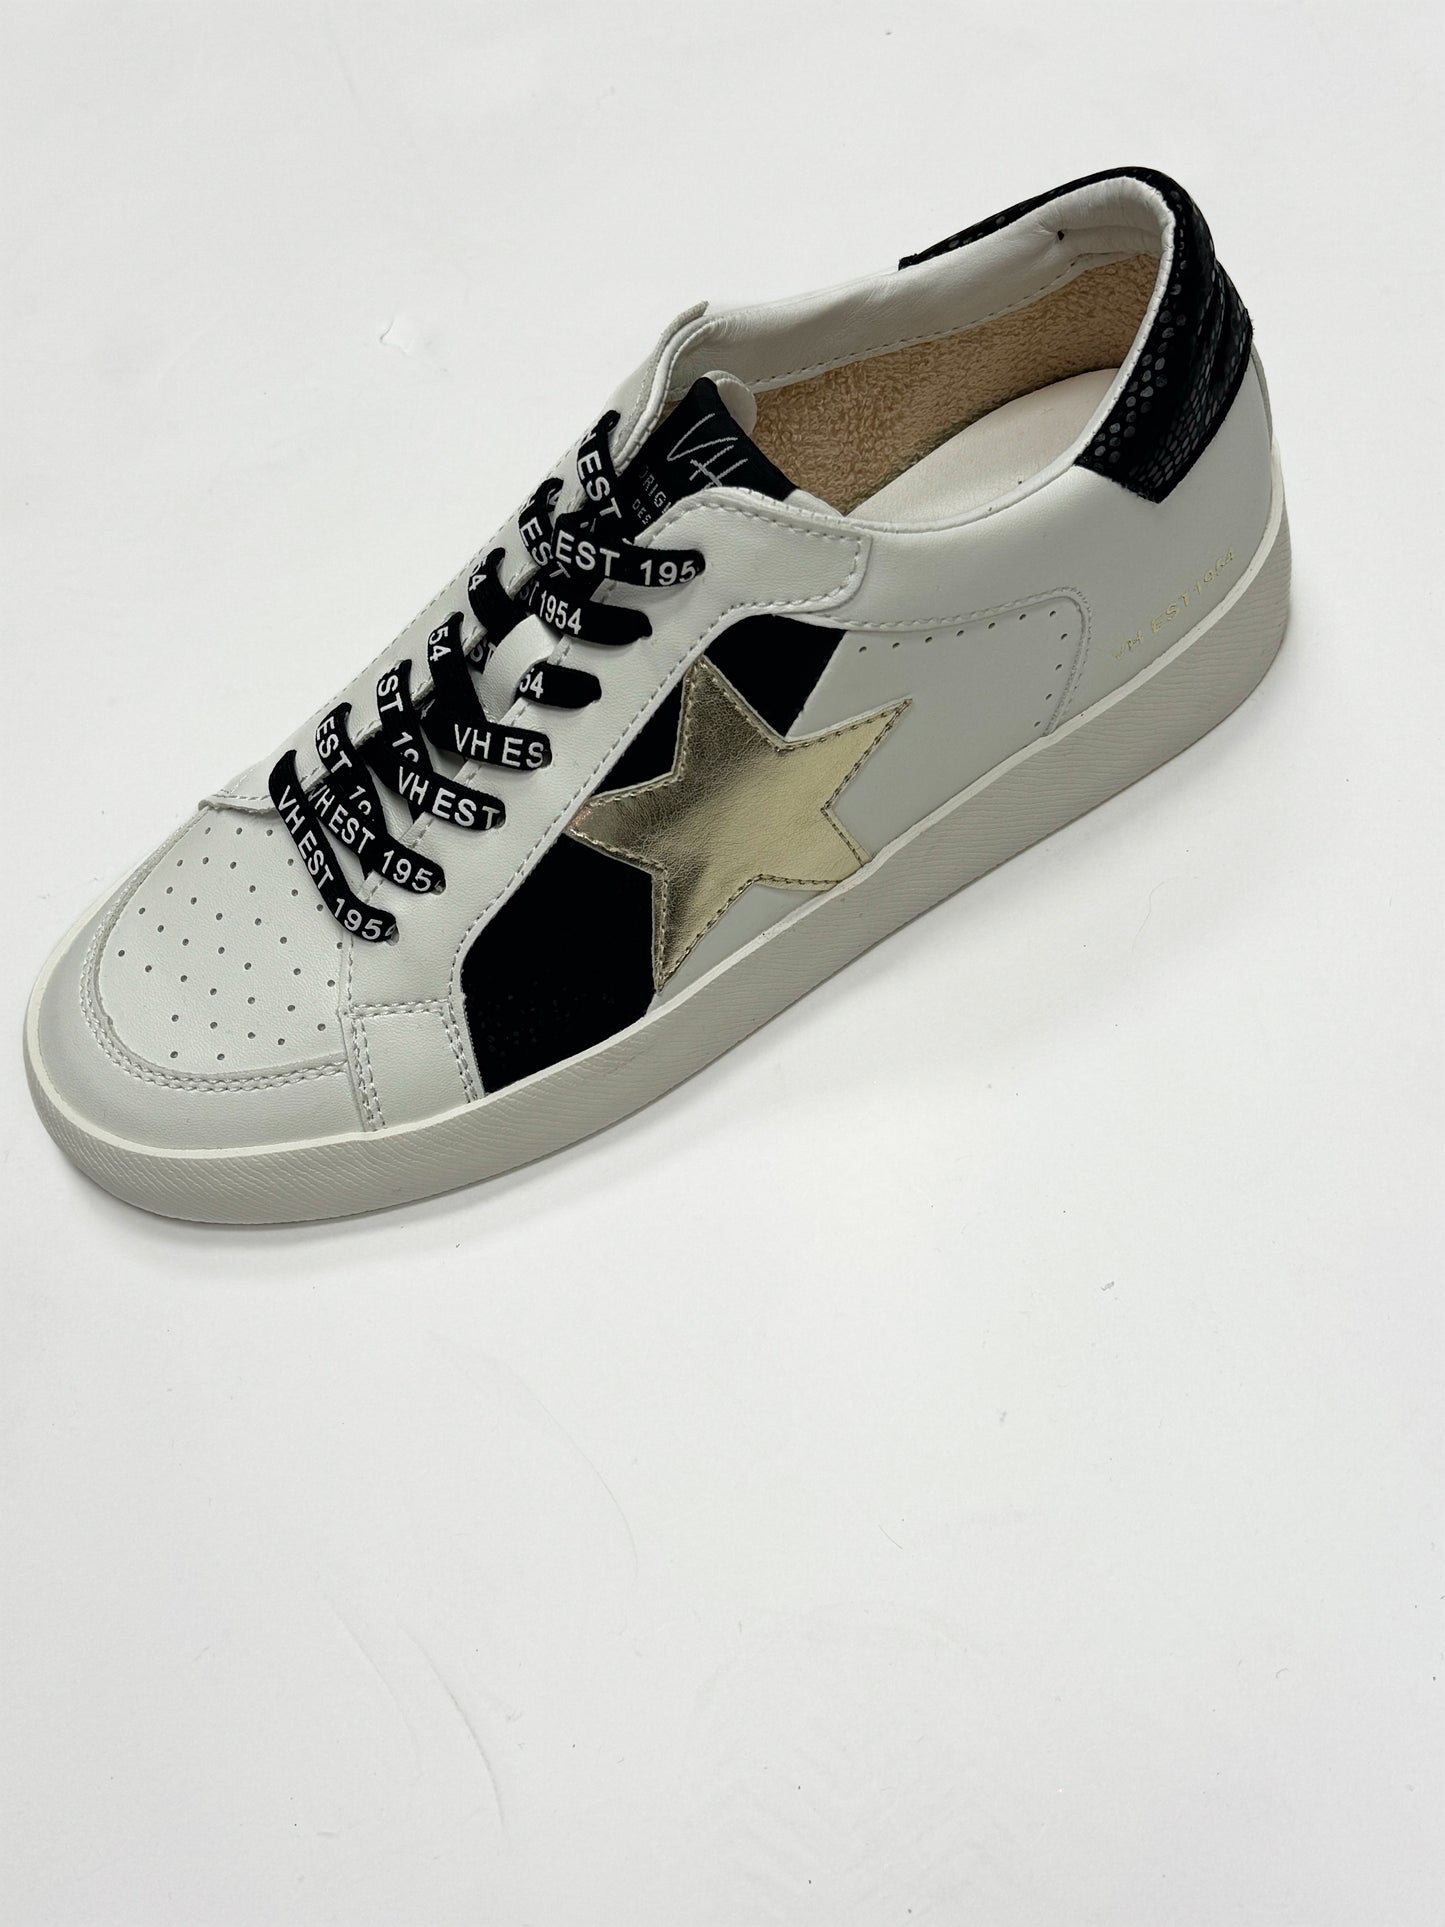 Vintage Havana Sneakers Black And White With gold Star